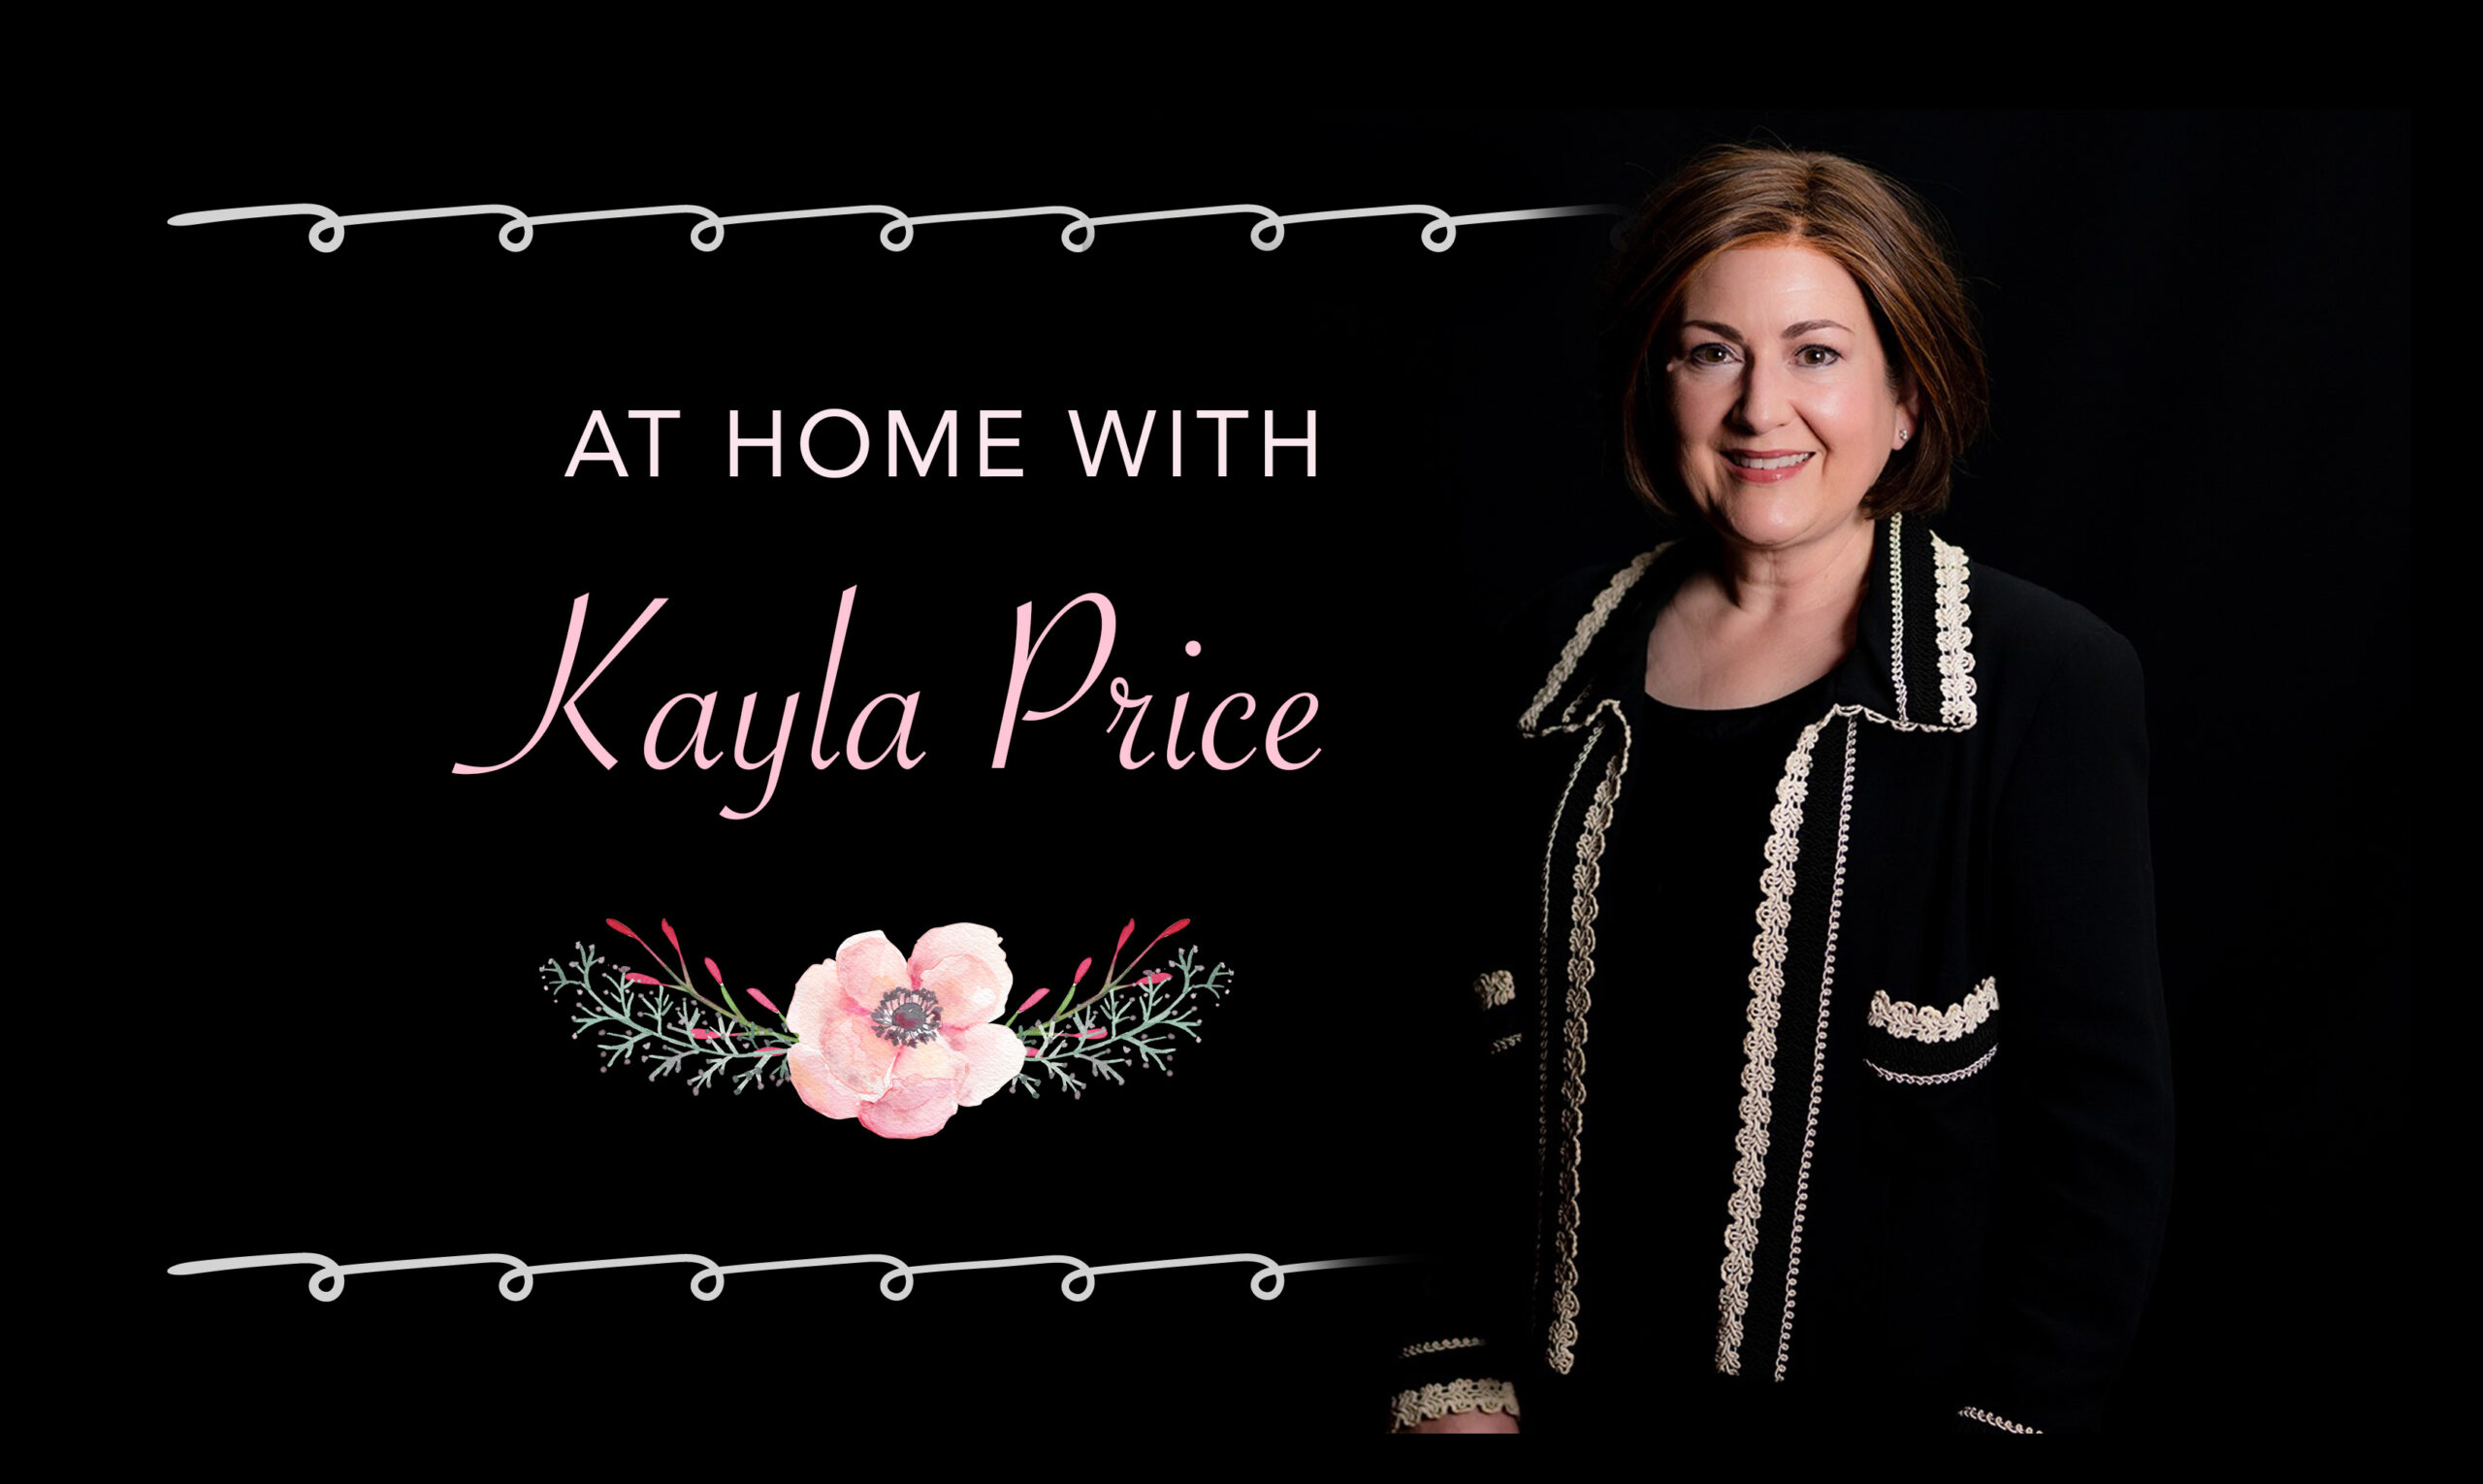 At Home with Kayla Price 1/28